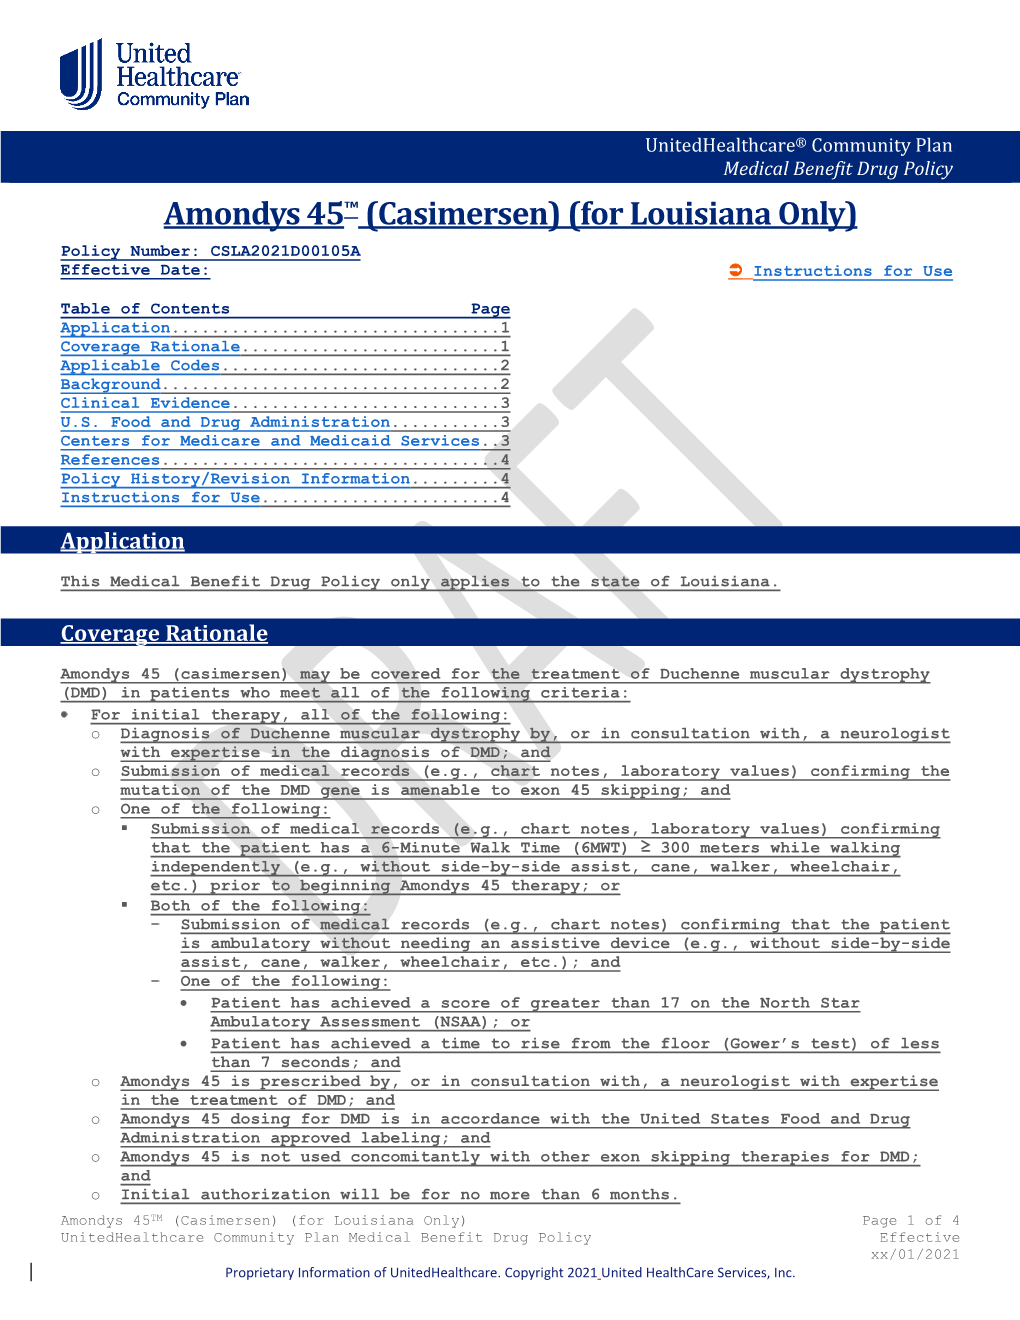 Amondys 45™ (Casimersen) (For Louisiana Only) Policy Number: CSLA2021D00105A Effective Date:  Instructions for Use